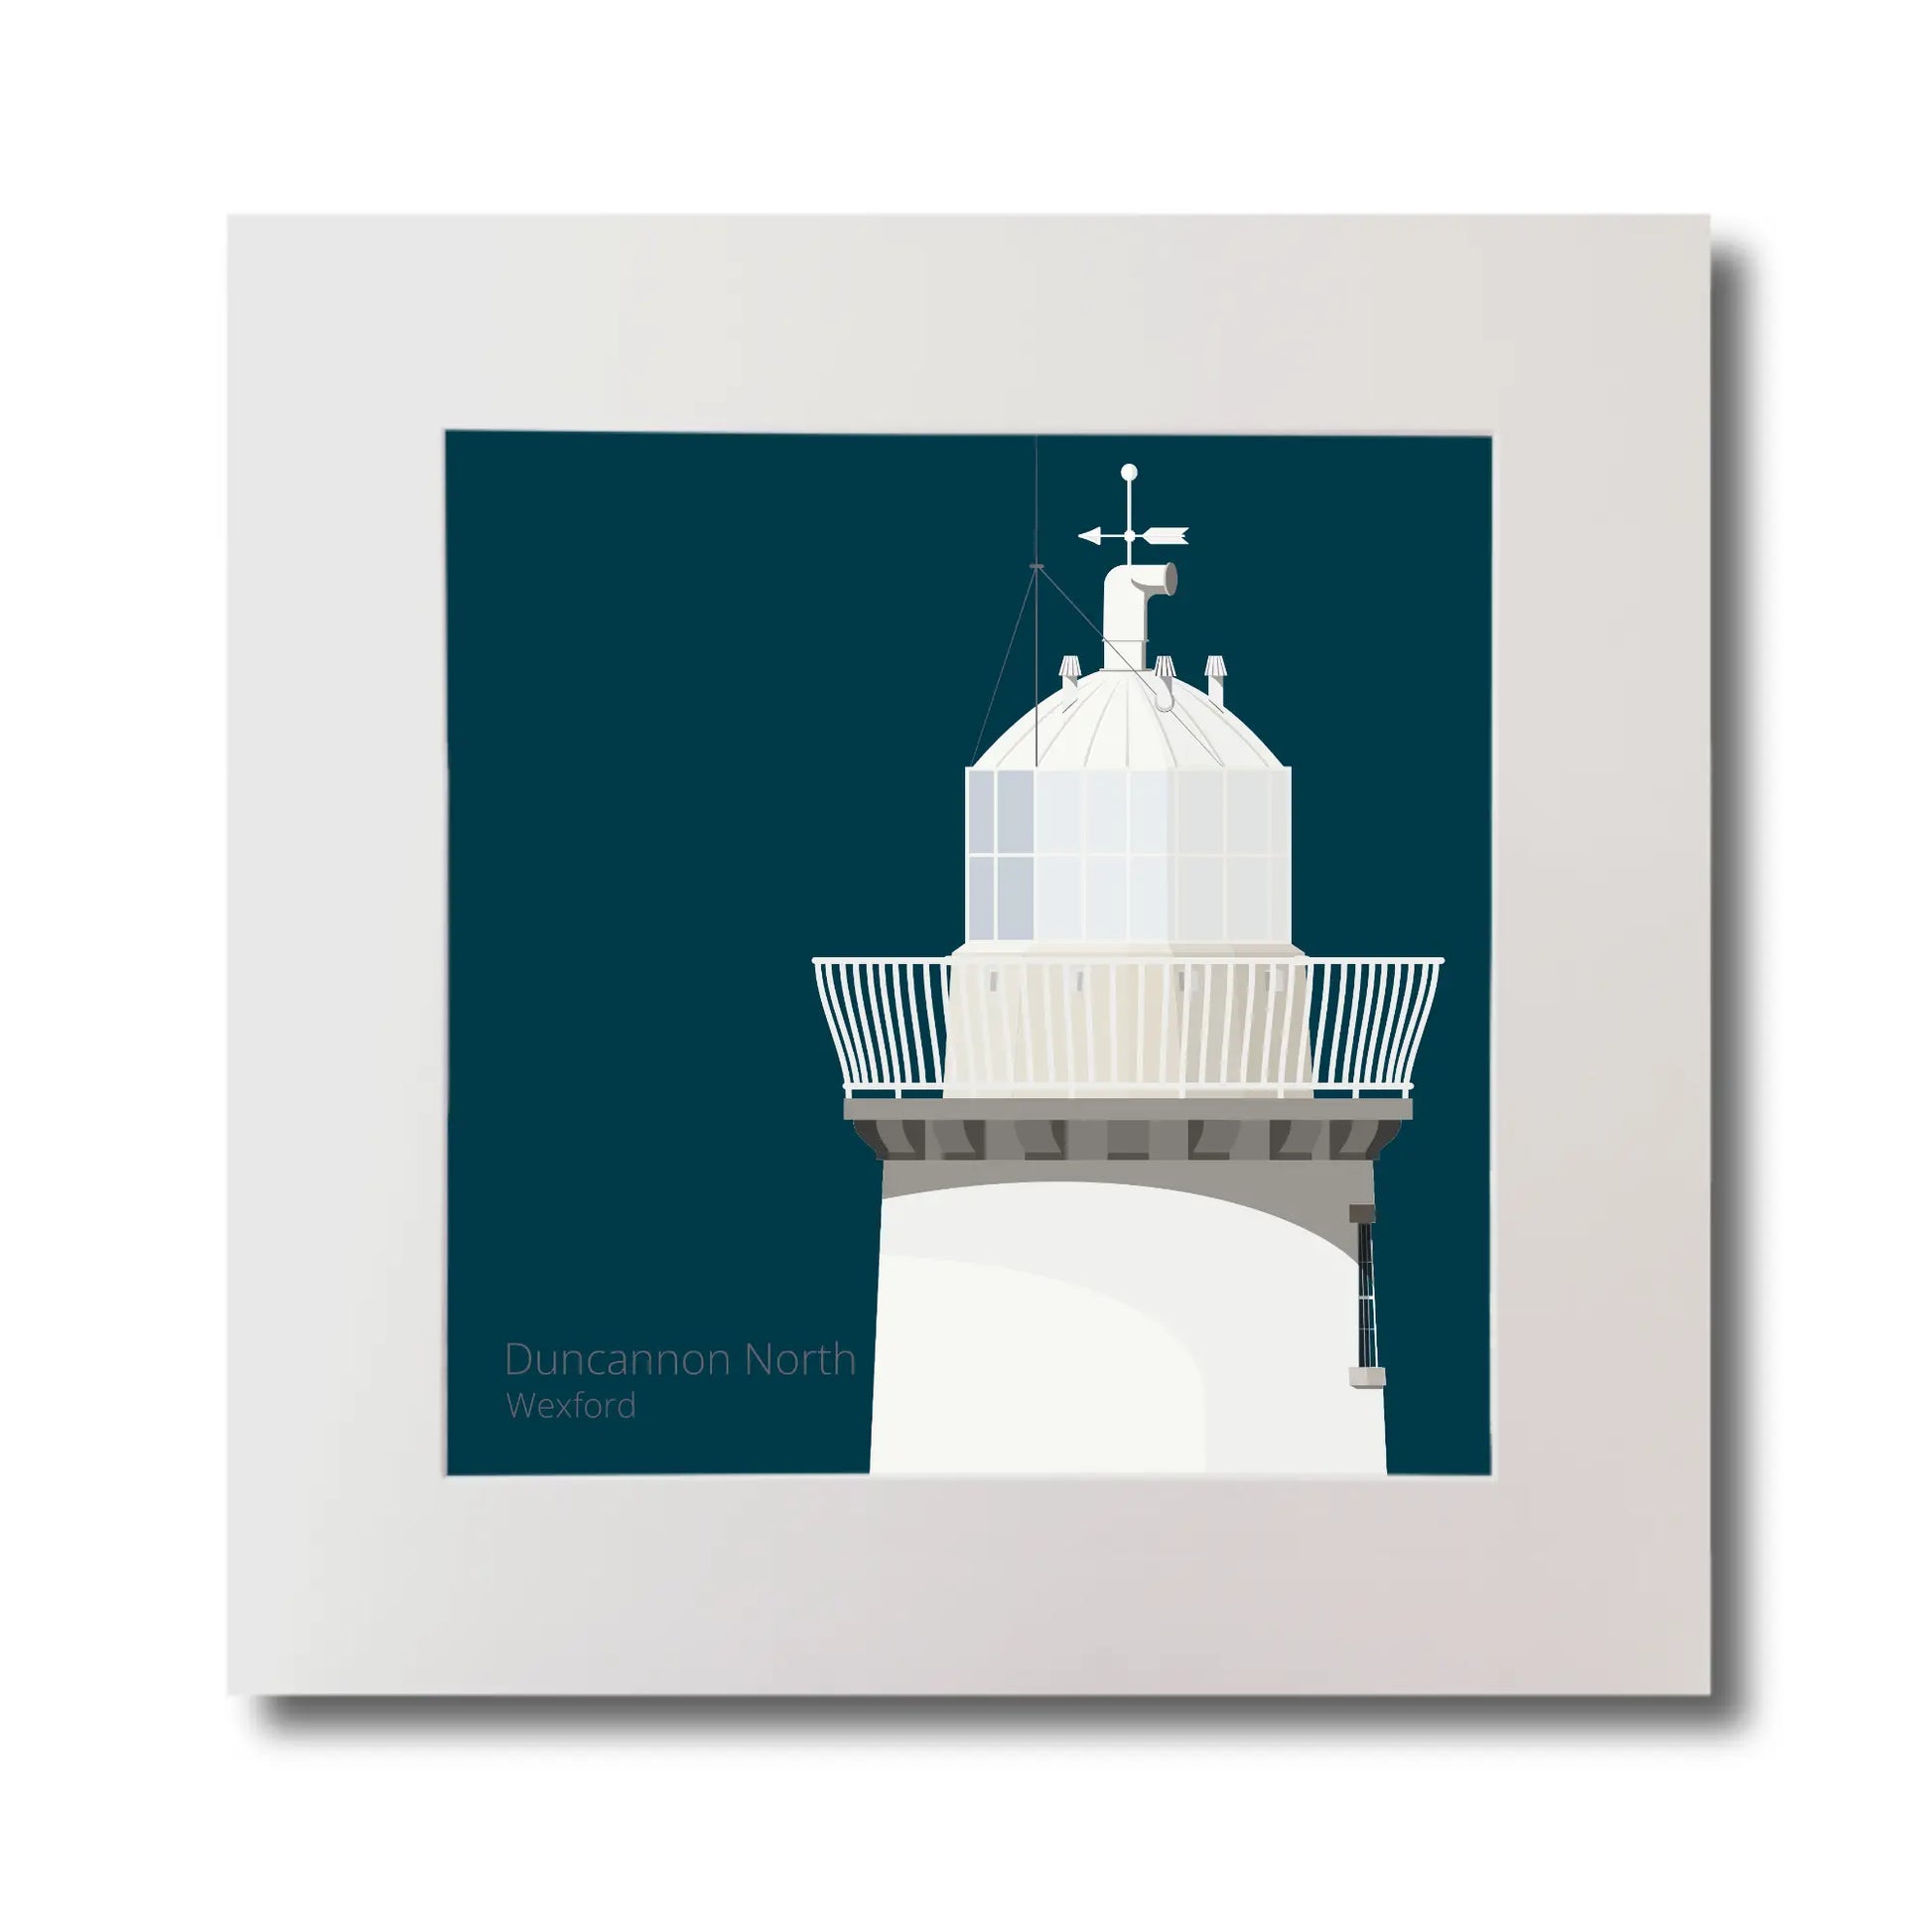 Illustration  Duncannon North lighthouse on a midnight blue background, mounted and measuring 30x30cm.